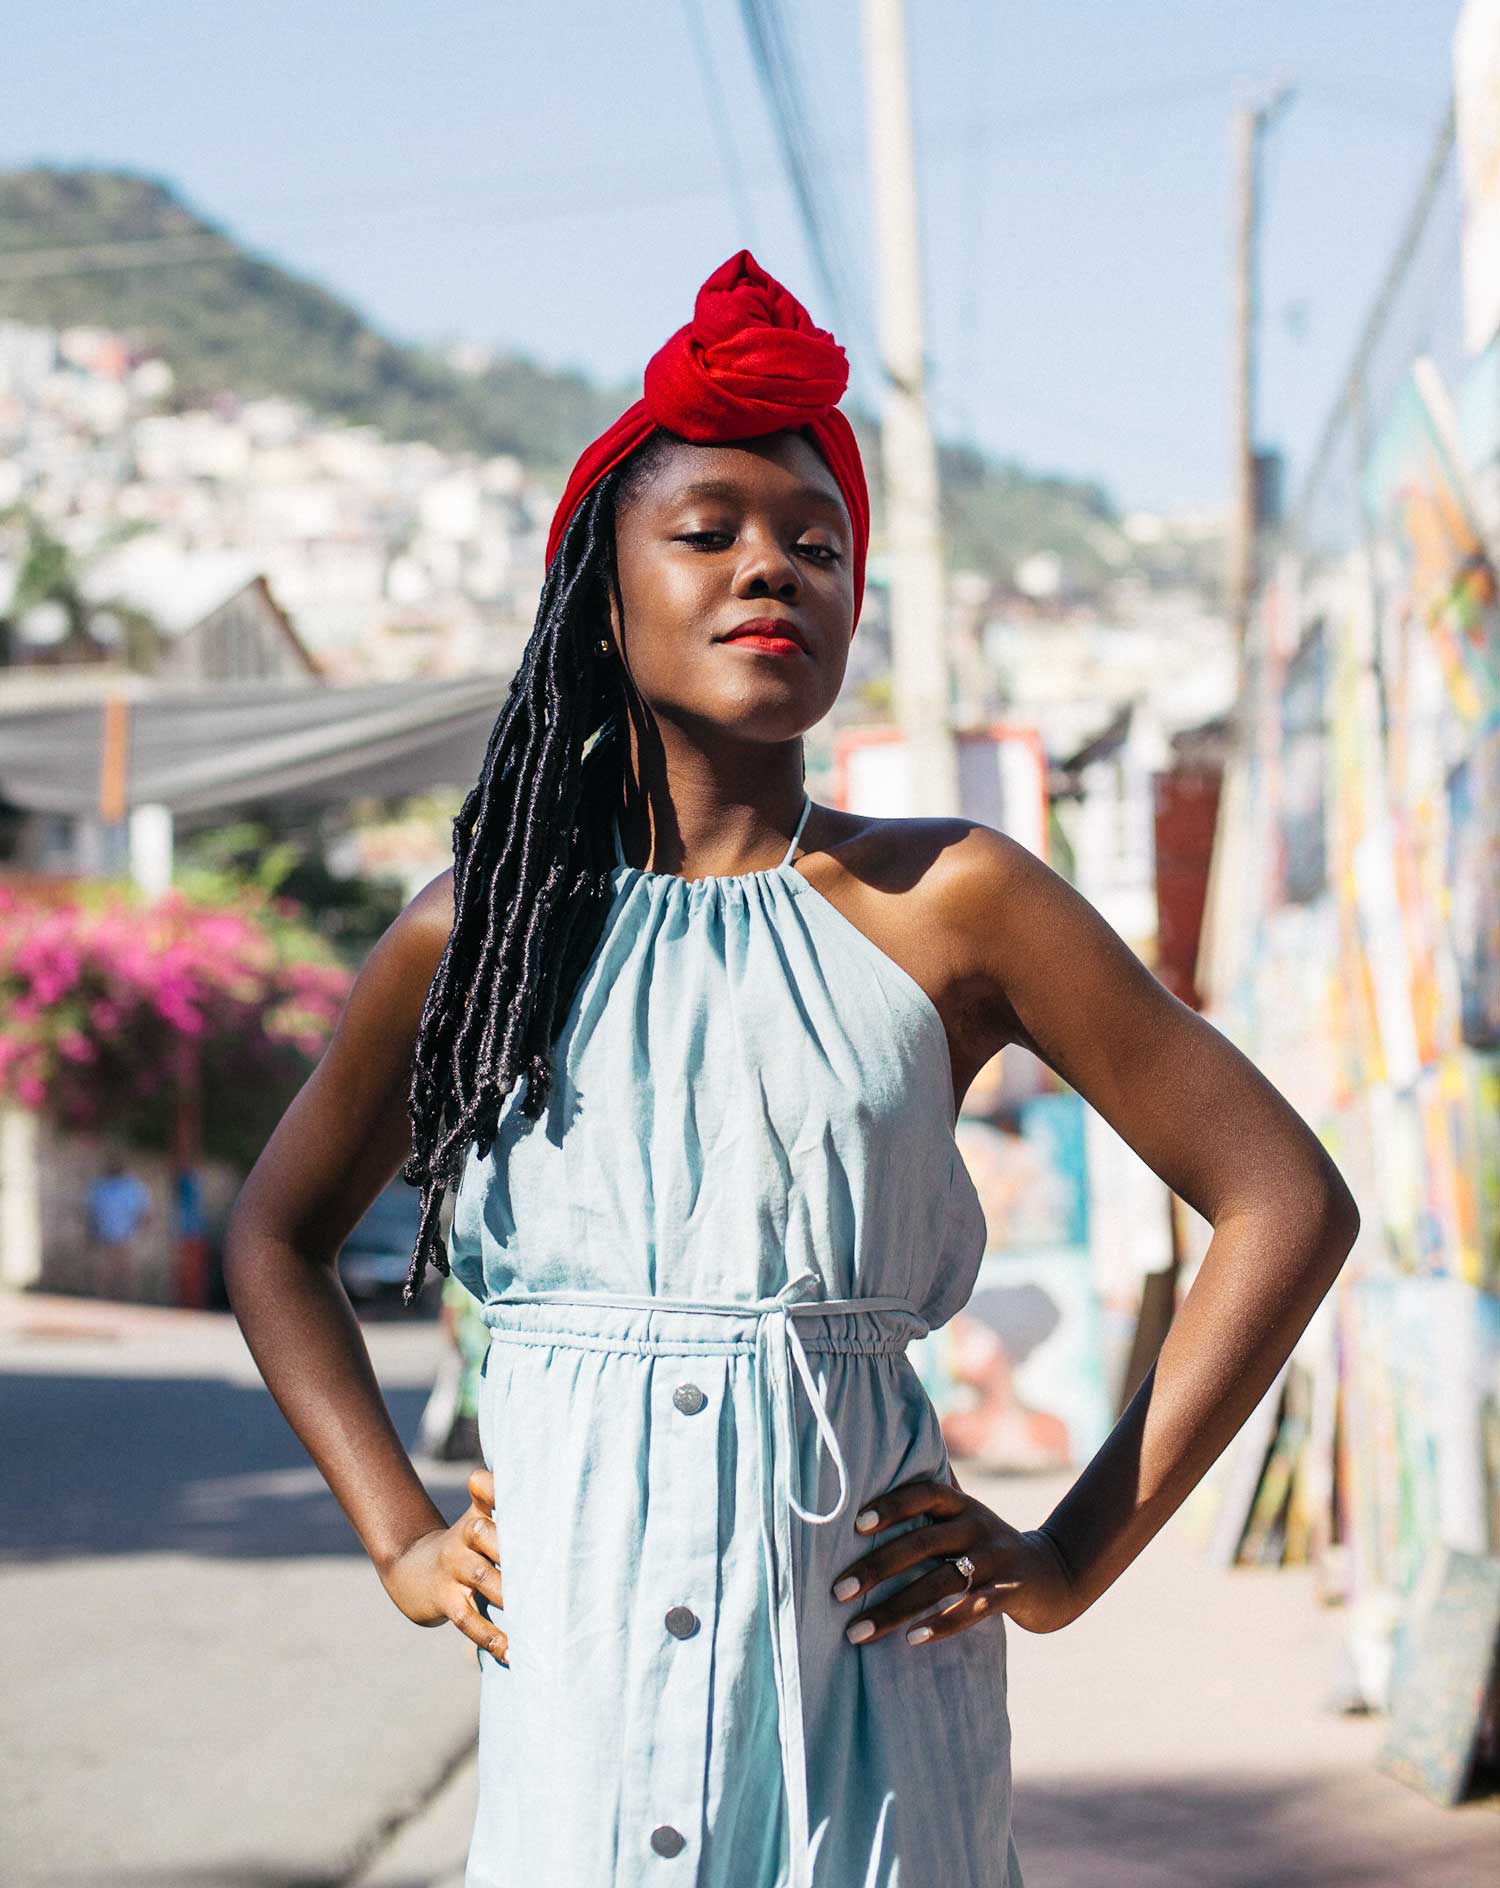 portrait photo of young stylish haitian girl with long dreadlocks and red head scarf